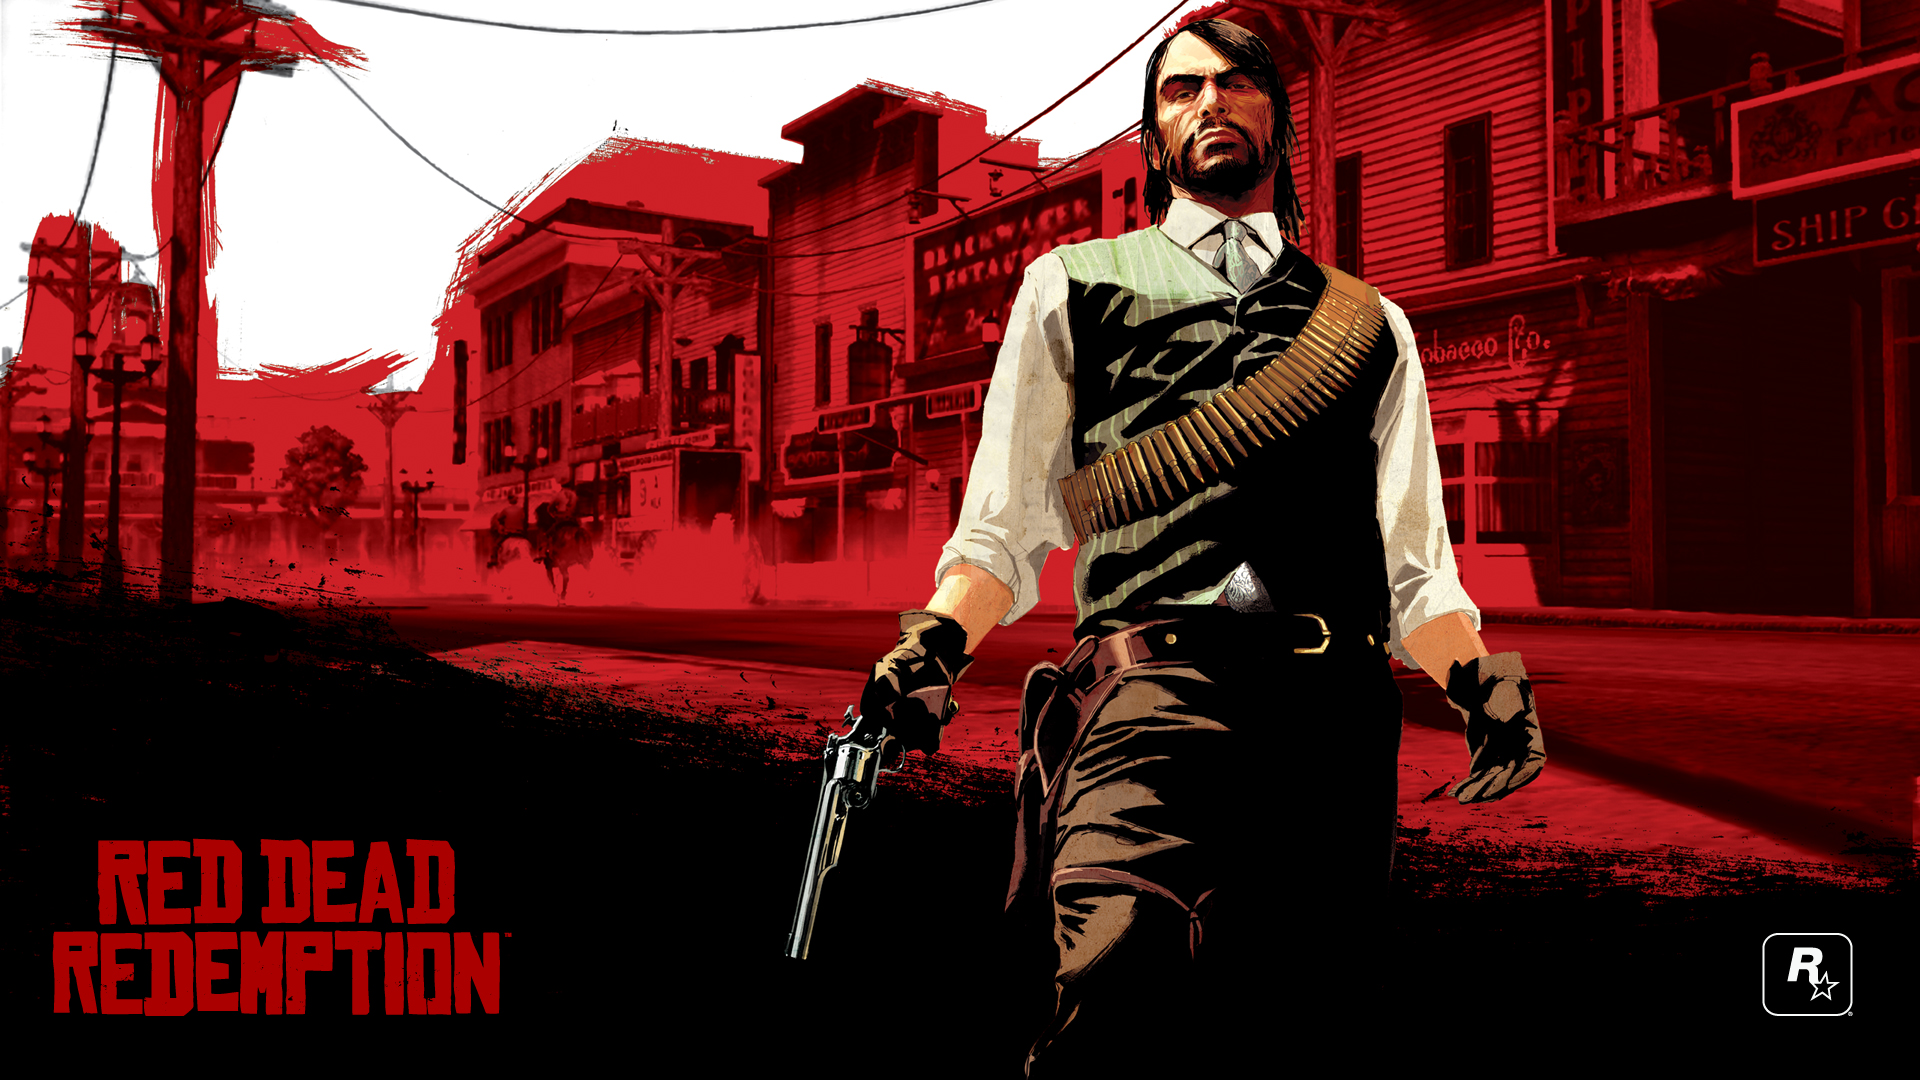 Free Red Dead Redemption Wallpaper 34875 1920x1080 px